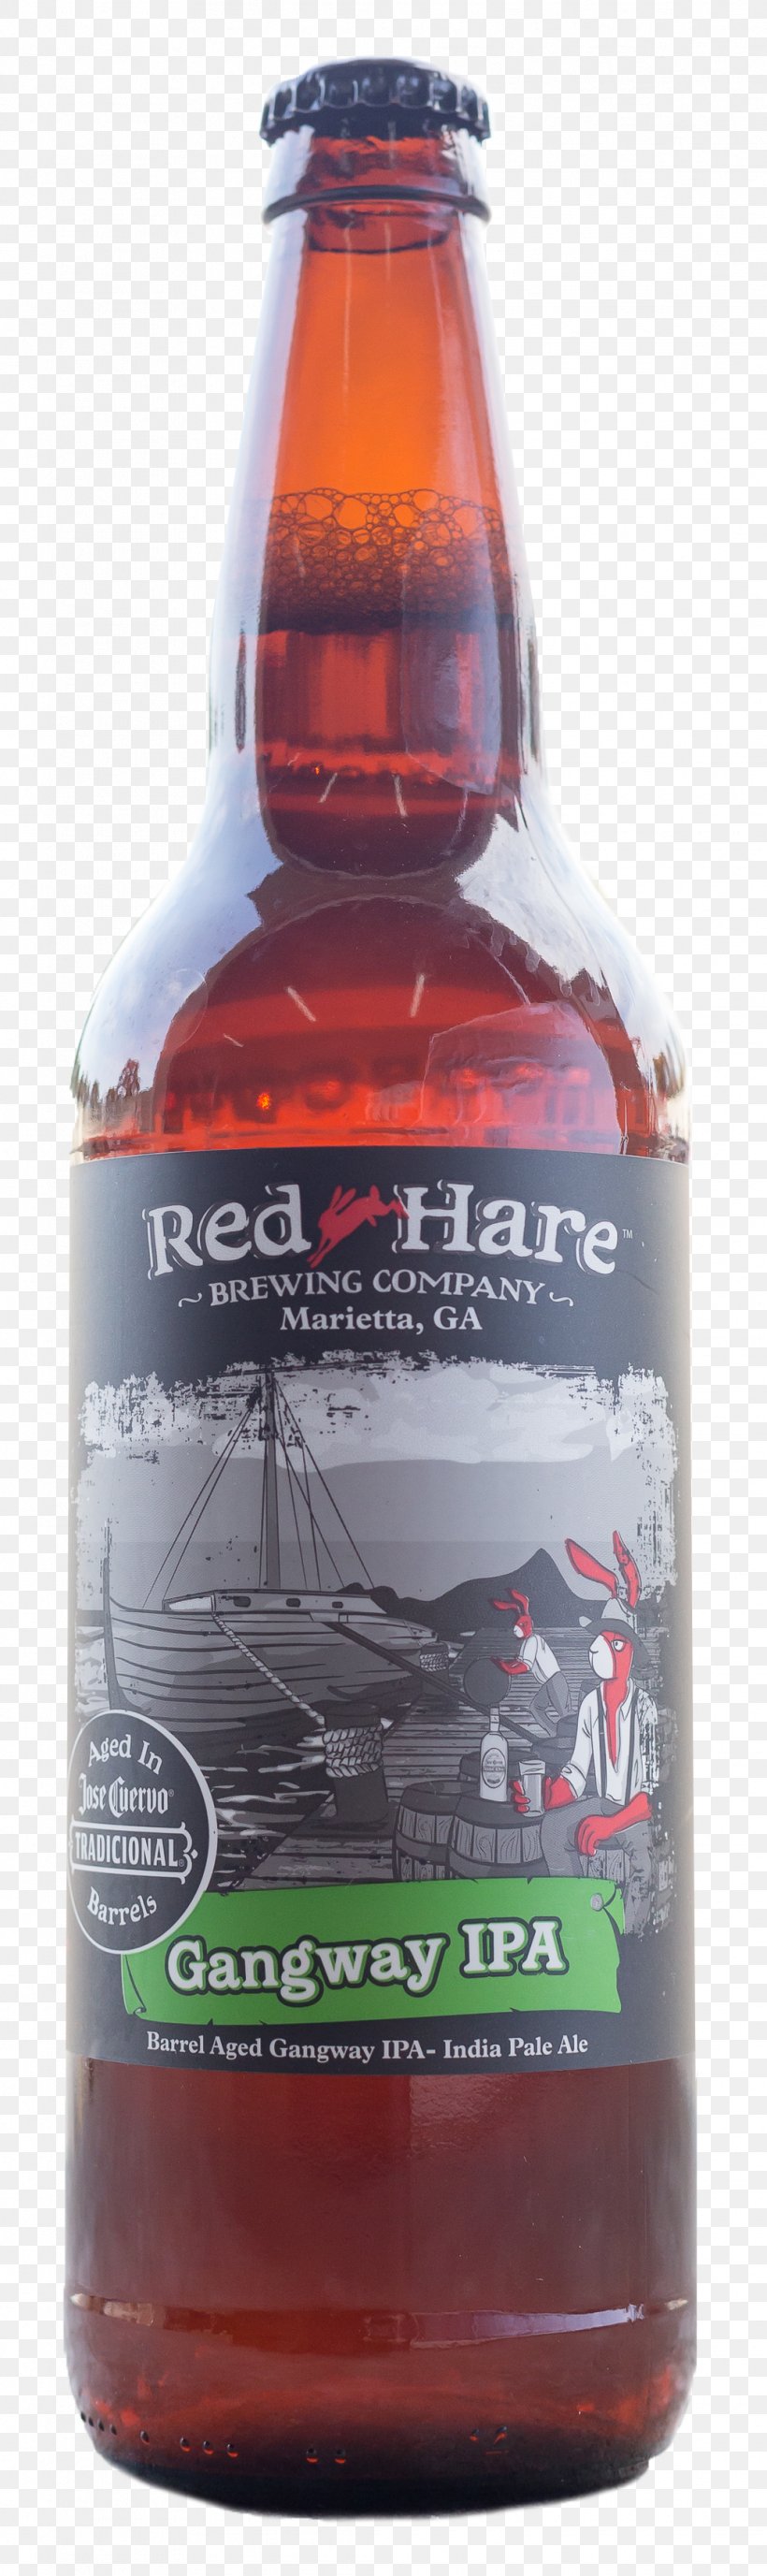 India Pale Ale Red Hare Brewing Company Glass Bottle Beer, PNG, 1035x3475px, Ale, Beer, Beer Bottle, Bottle, Brewery Download Free